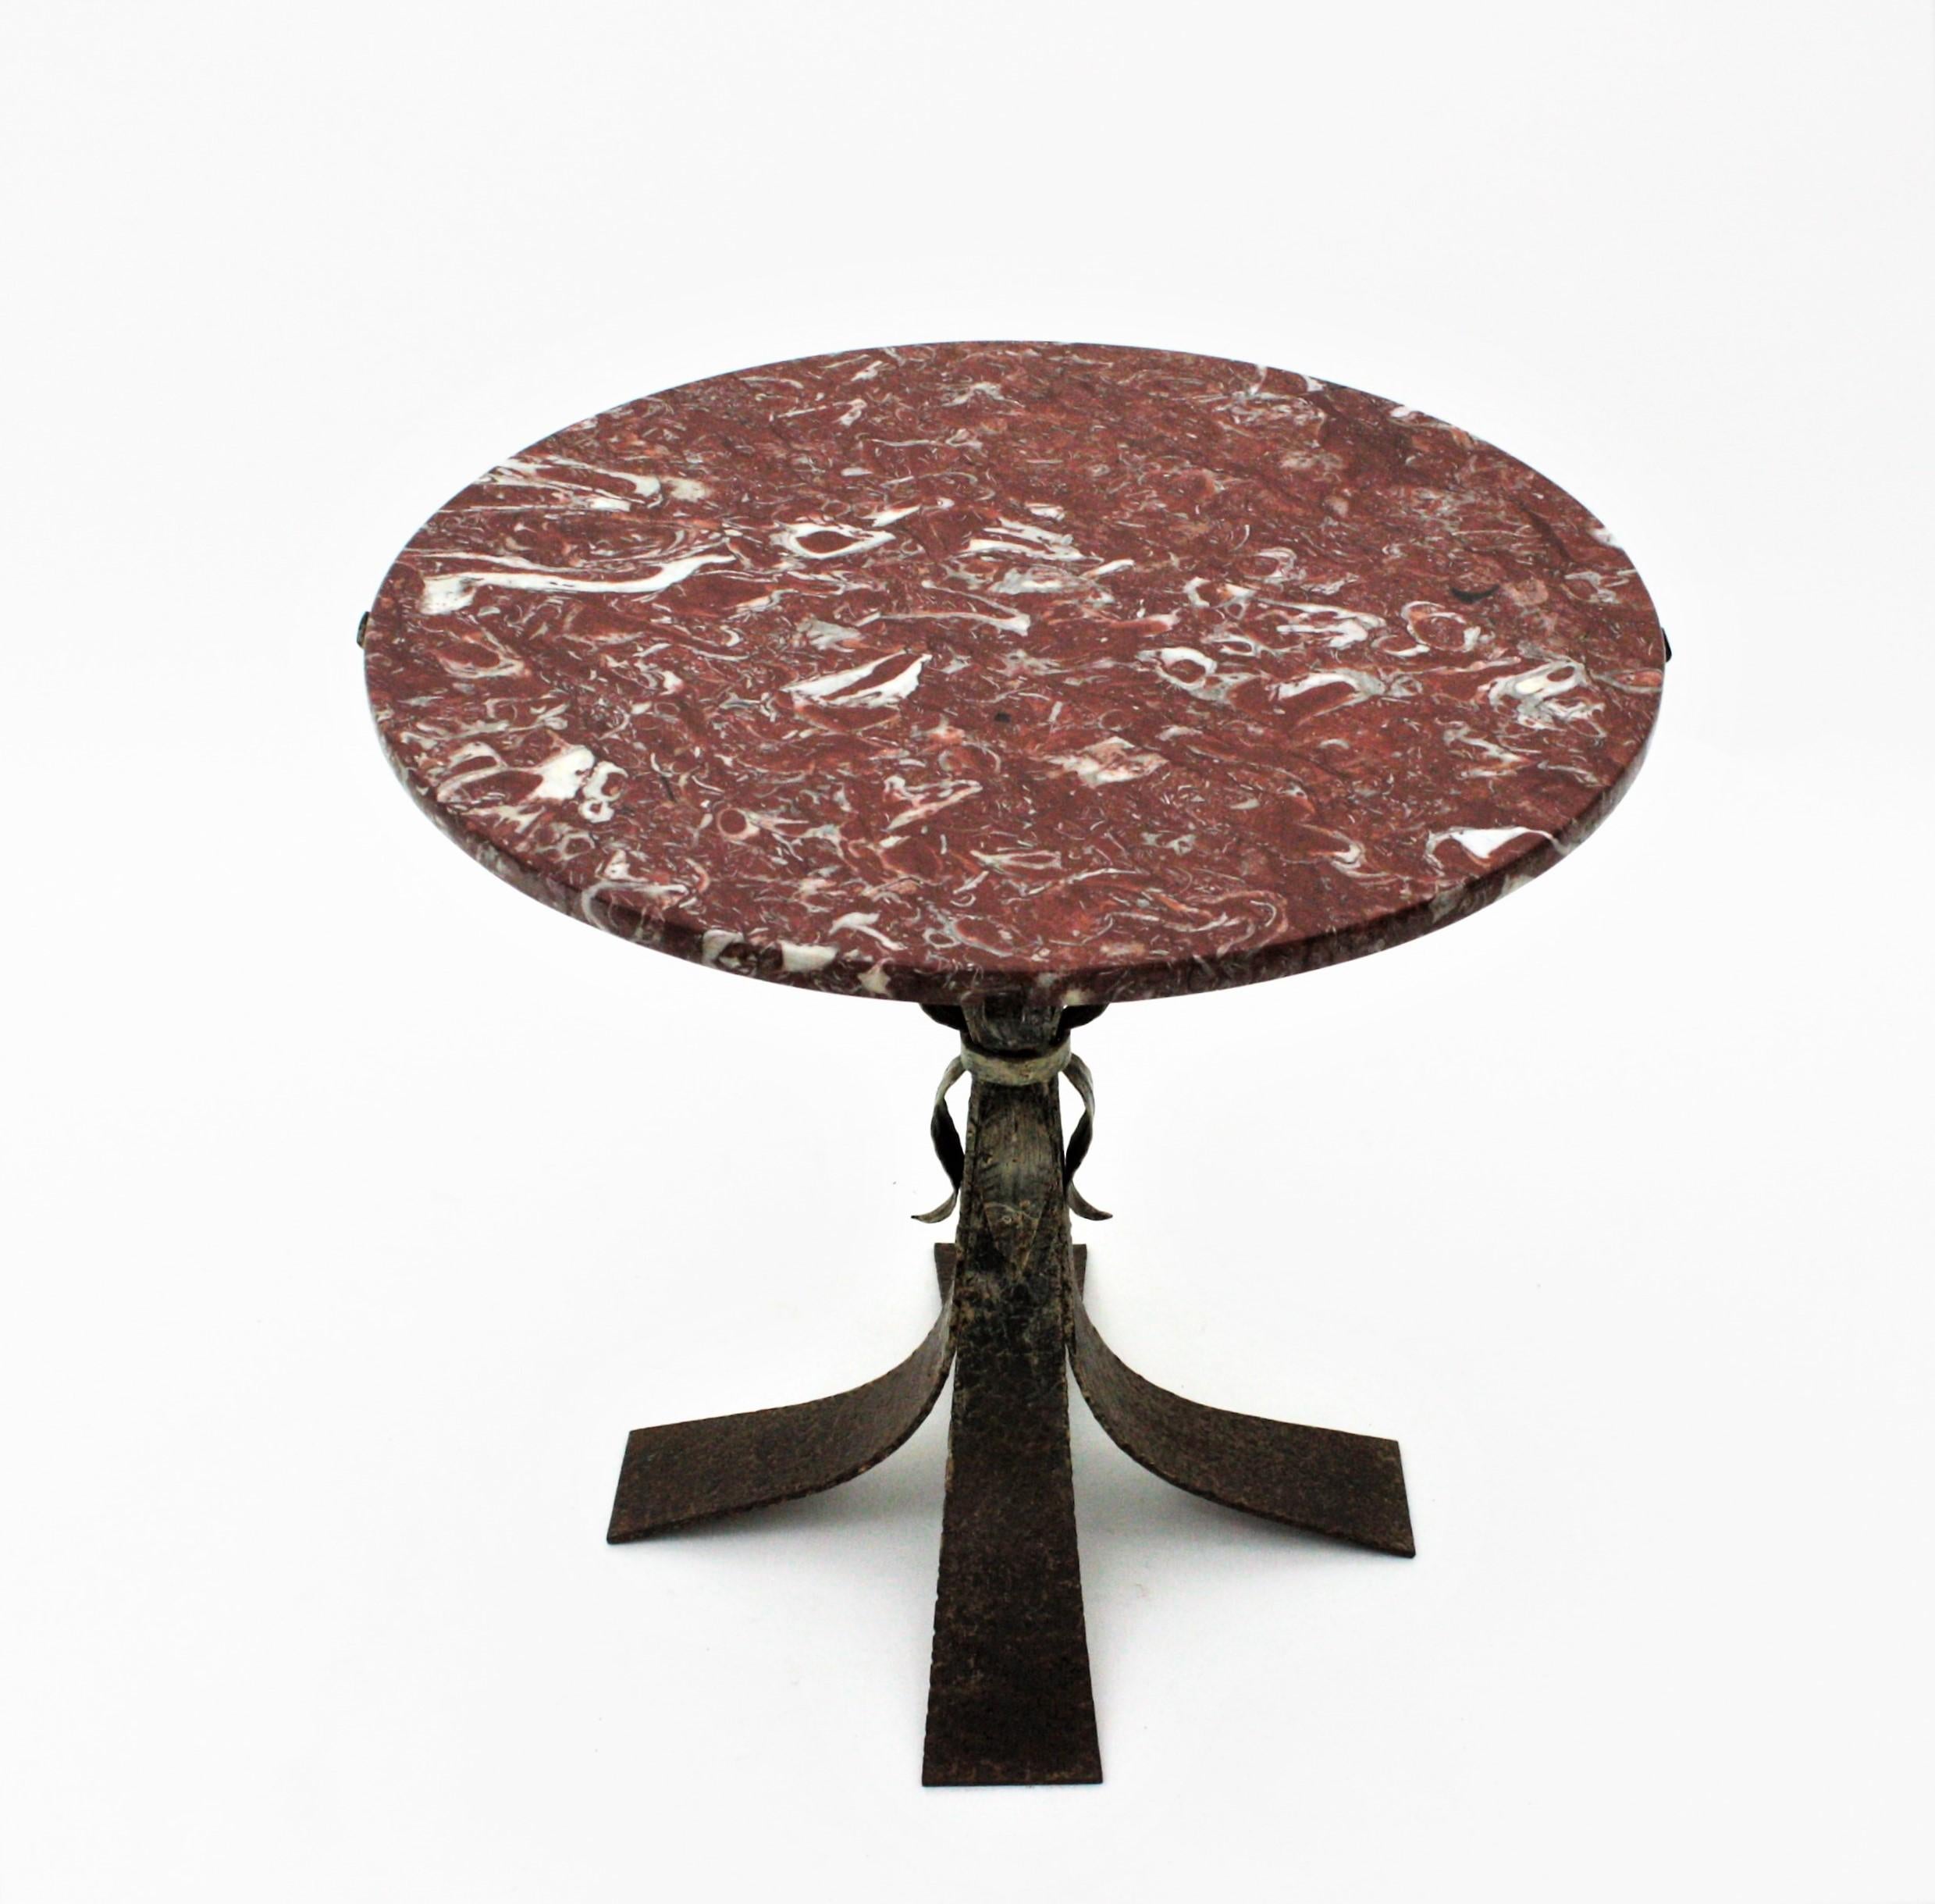 Eye-catching Mid-Century Modern wrought iron low table with garnet and white marble top. Spain, 1950s.
This side table has a beautiful spotted marble top standing up on a wrought iron four feet base with leaf details. It retains rests of its